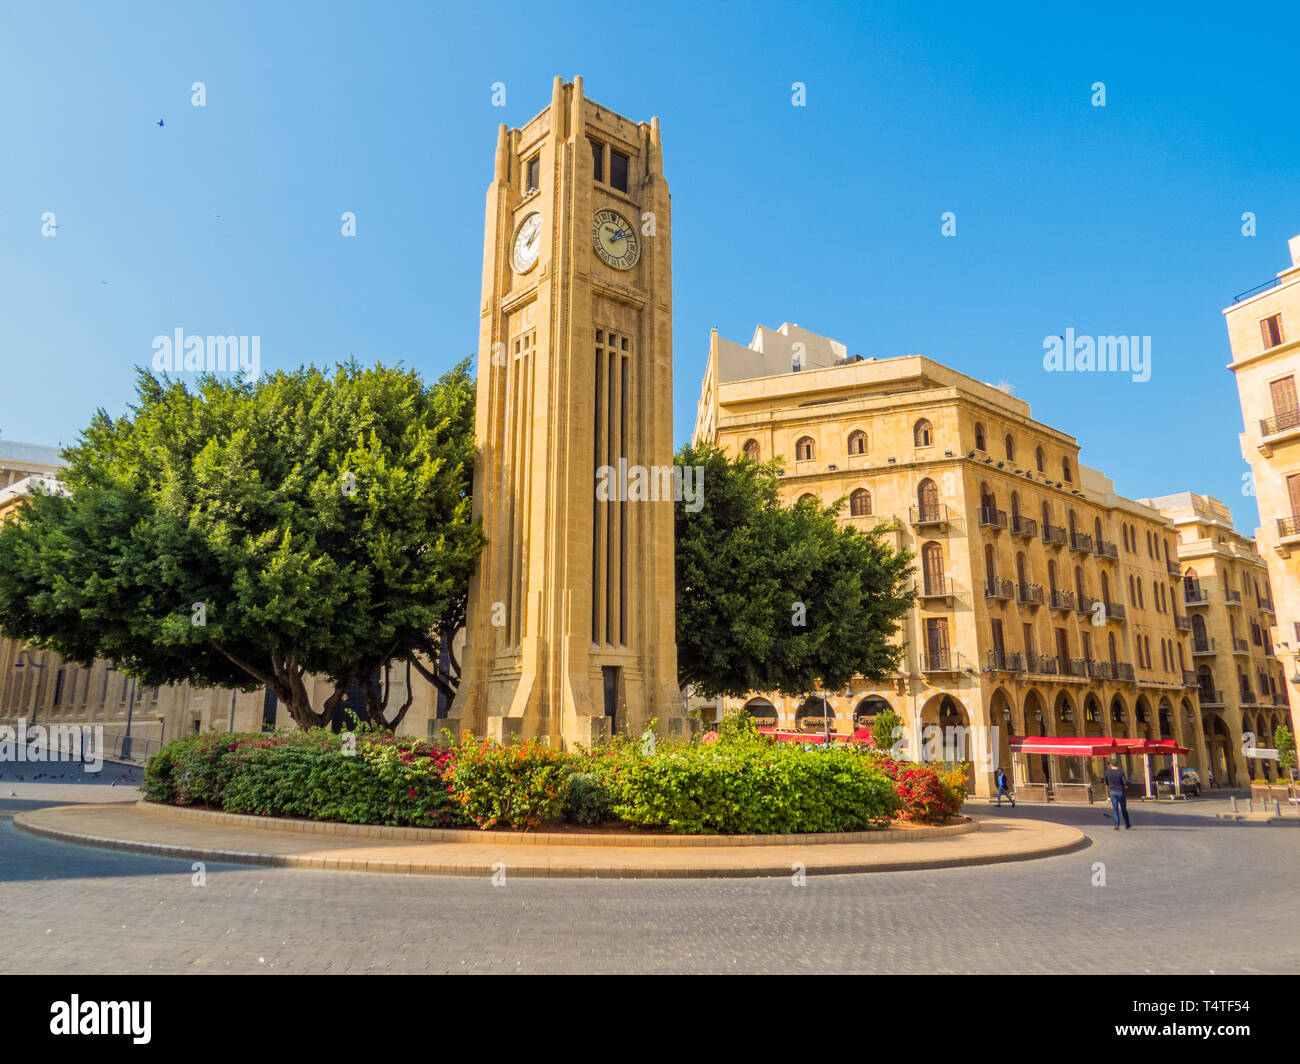 BEIRUT, LEBANON - MAY 22, 2017: View of Beirut Central District (or Centre Ville), the city's historical, geographical, commercial and administrative. Stock Photo